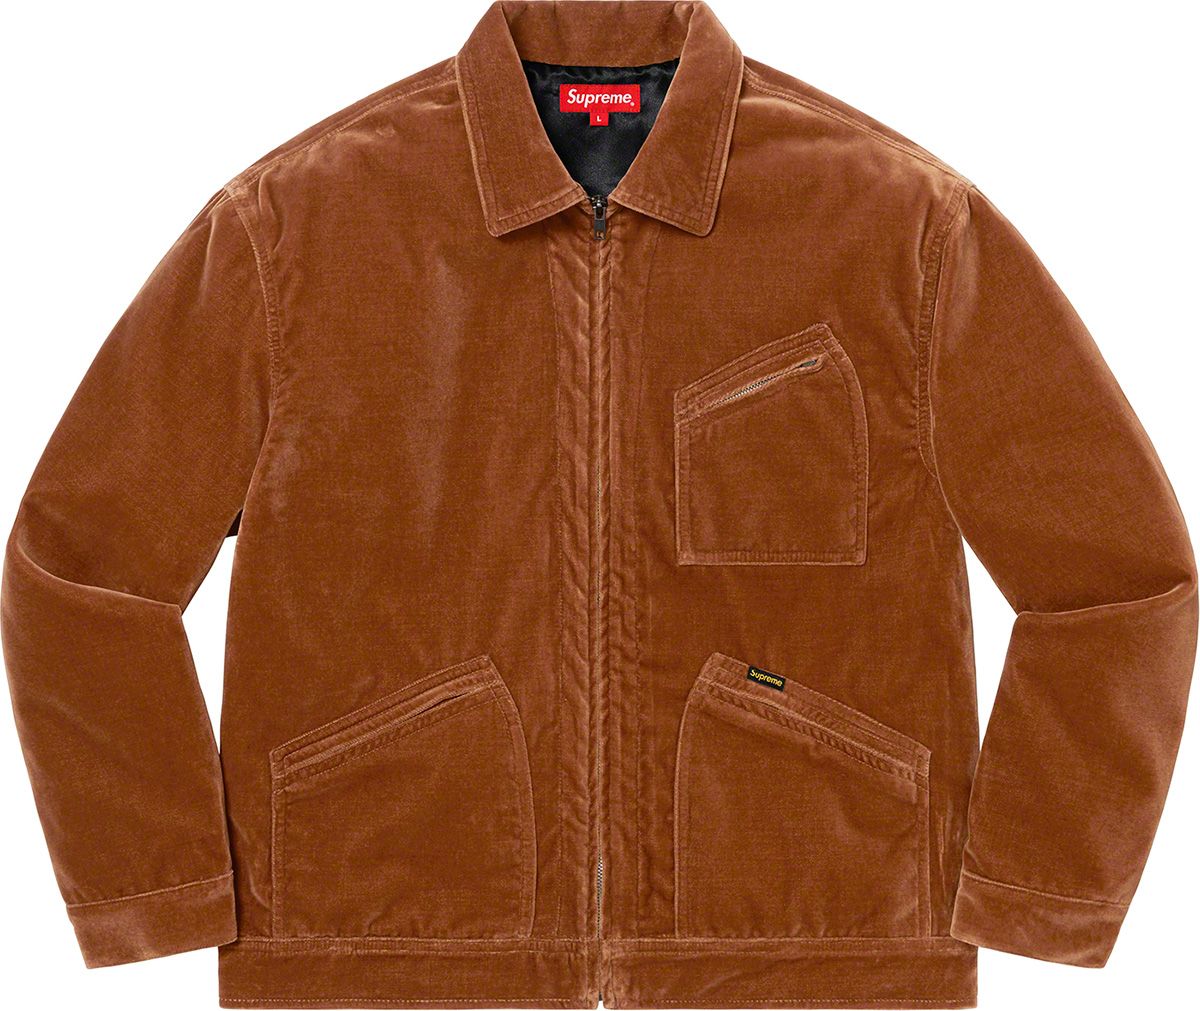 Aerial Tapestry Harrington Jacket - Fall/Winter 2020 Preview – Supreme